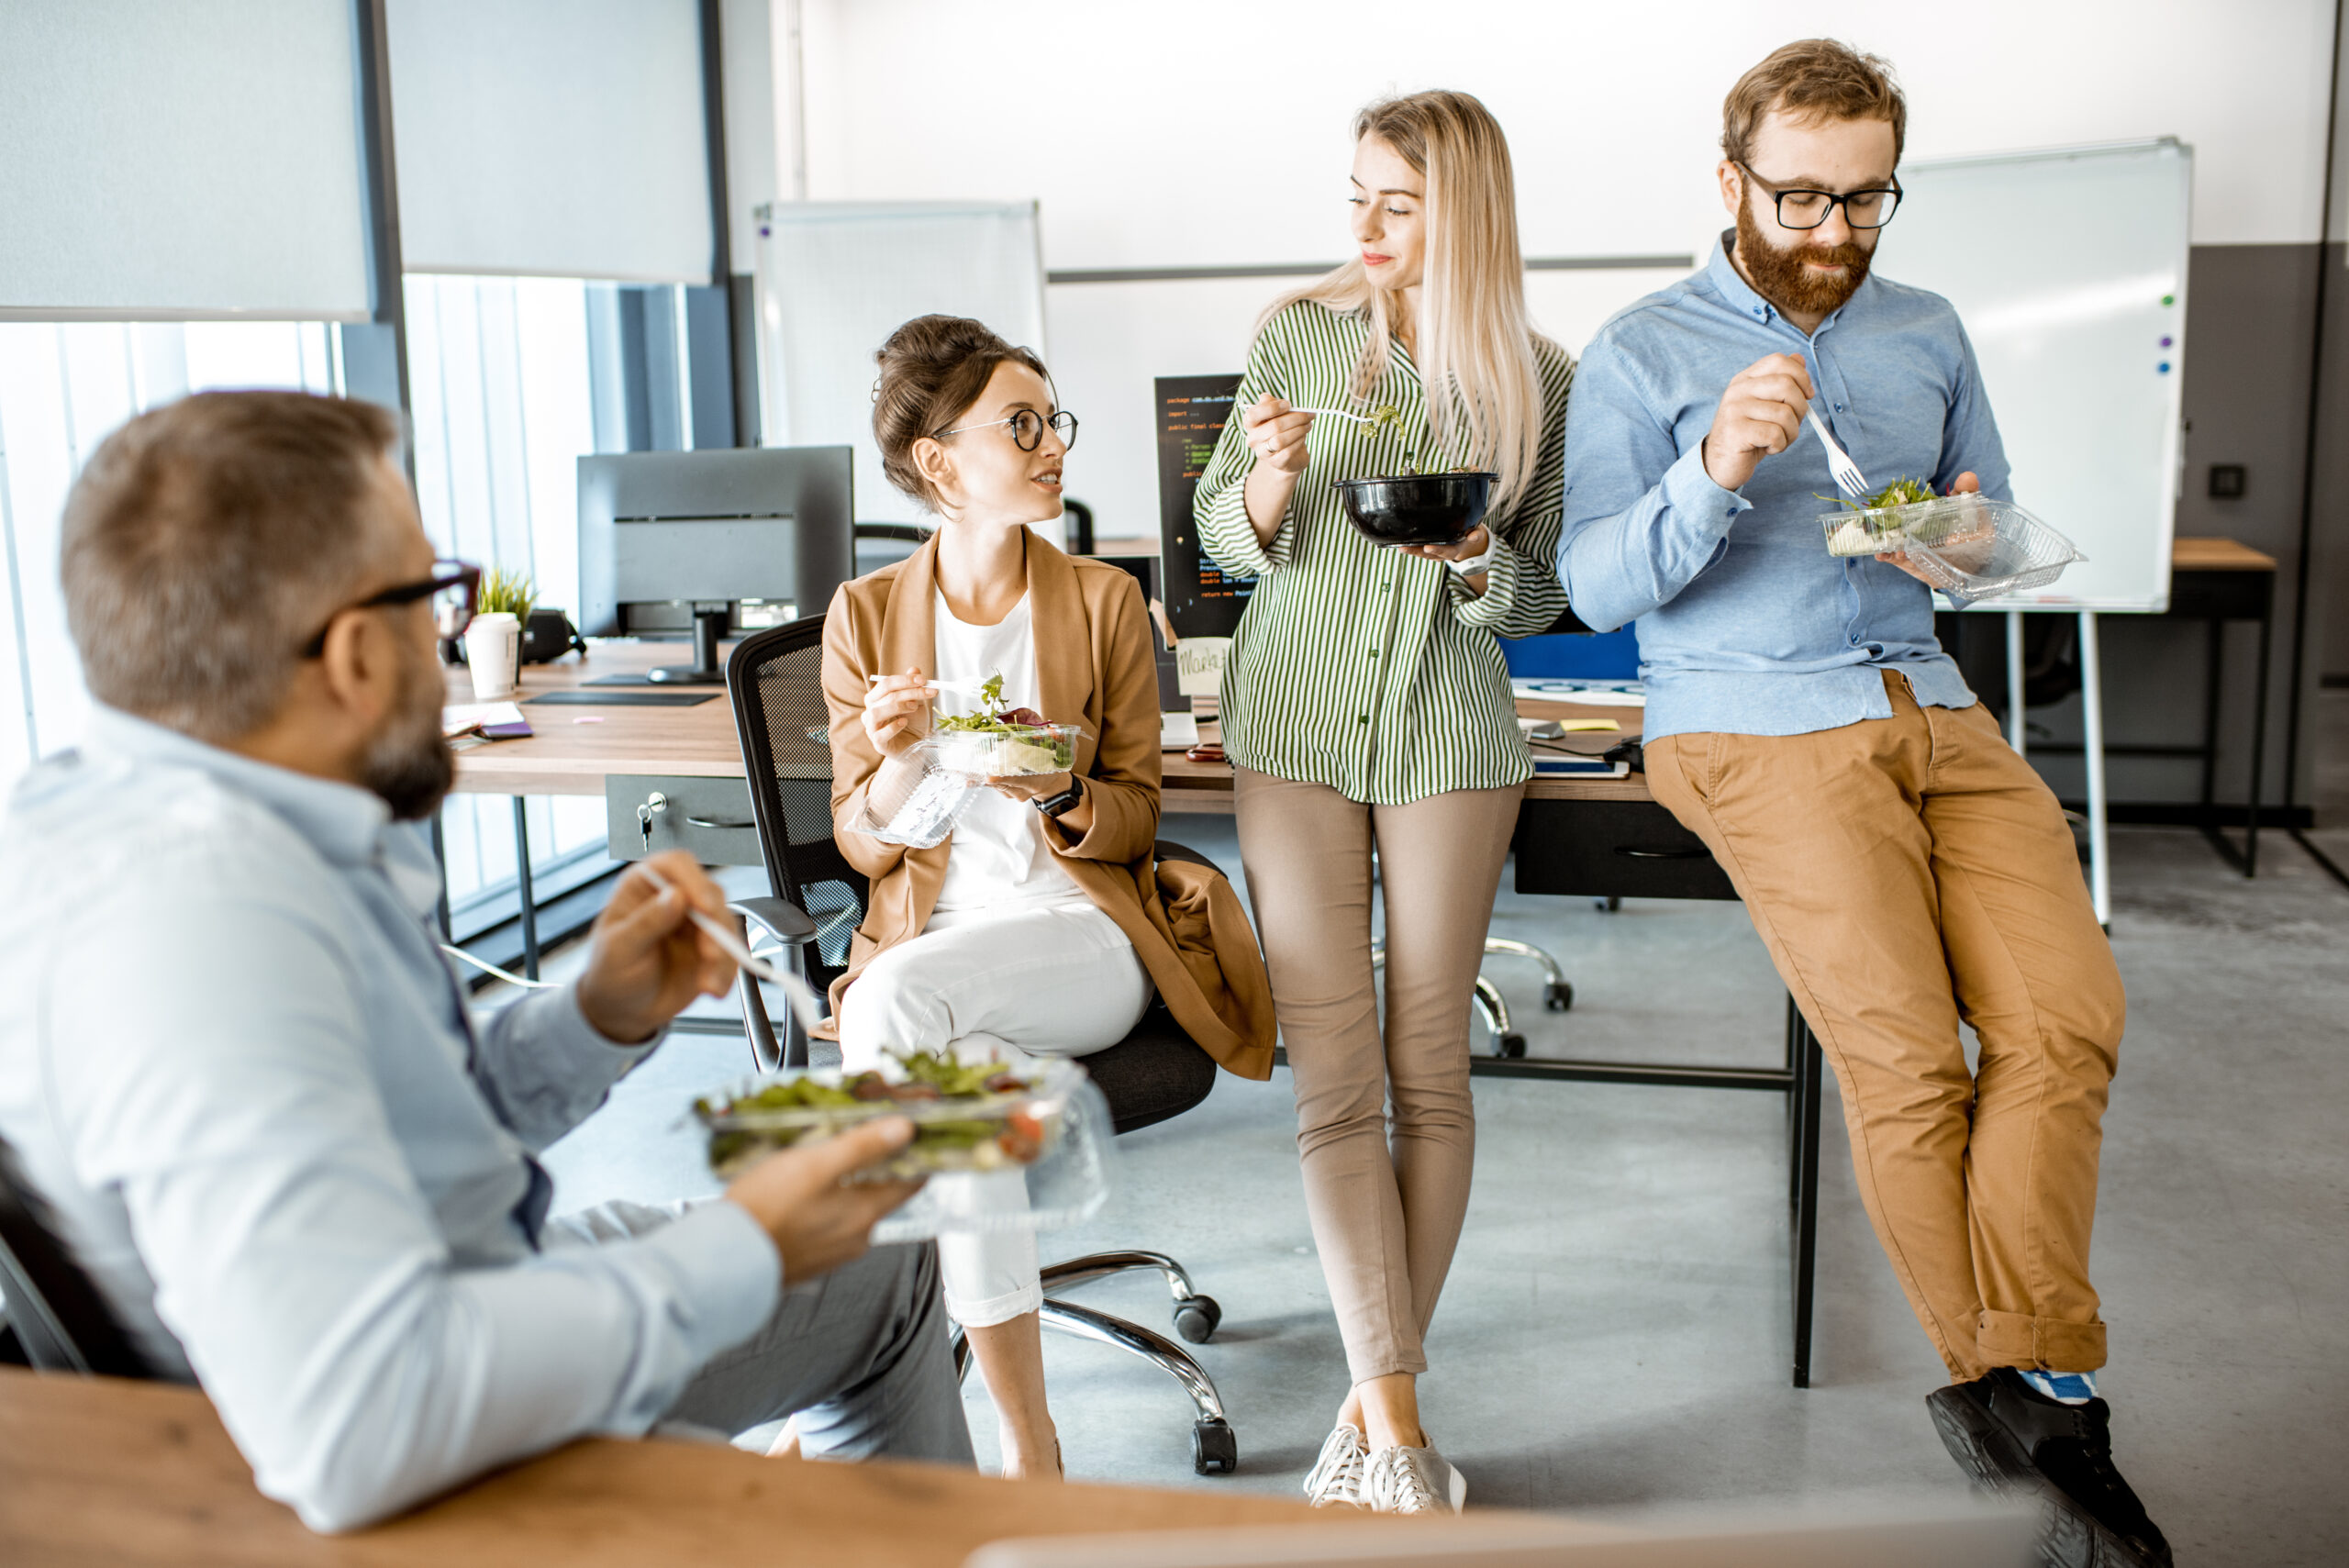 Attraction and Retention Trends: Group of diverse colleagues eating takeaway salad, sitting together and having fun during a lunchtime in the office.